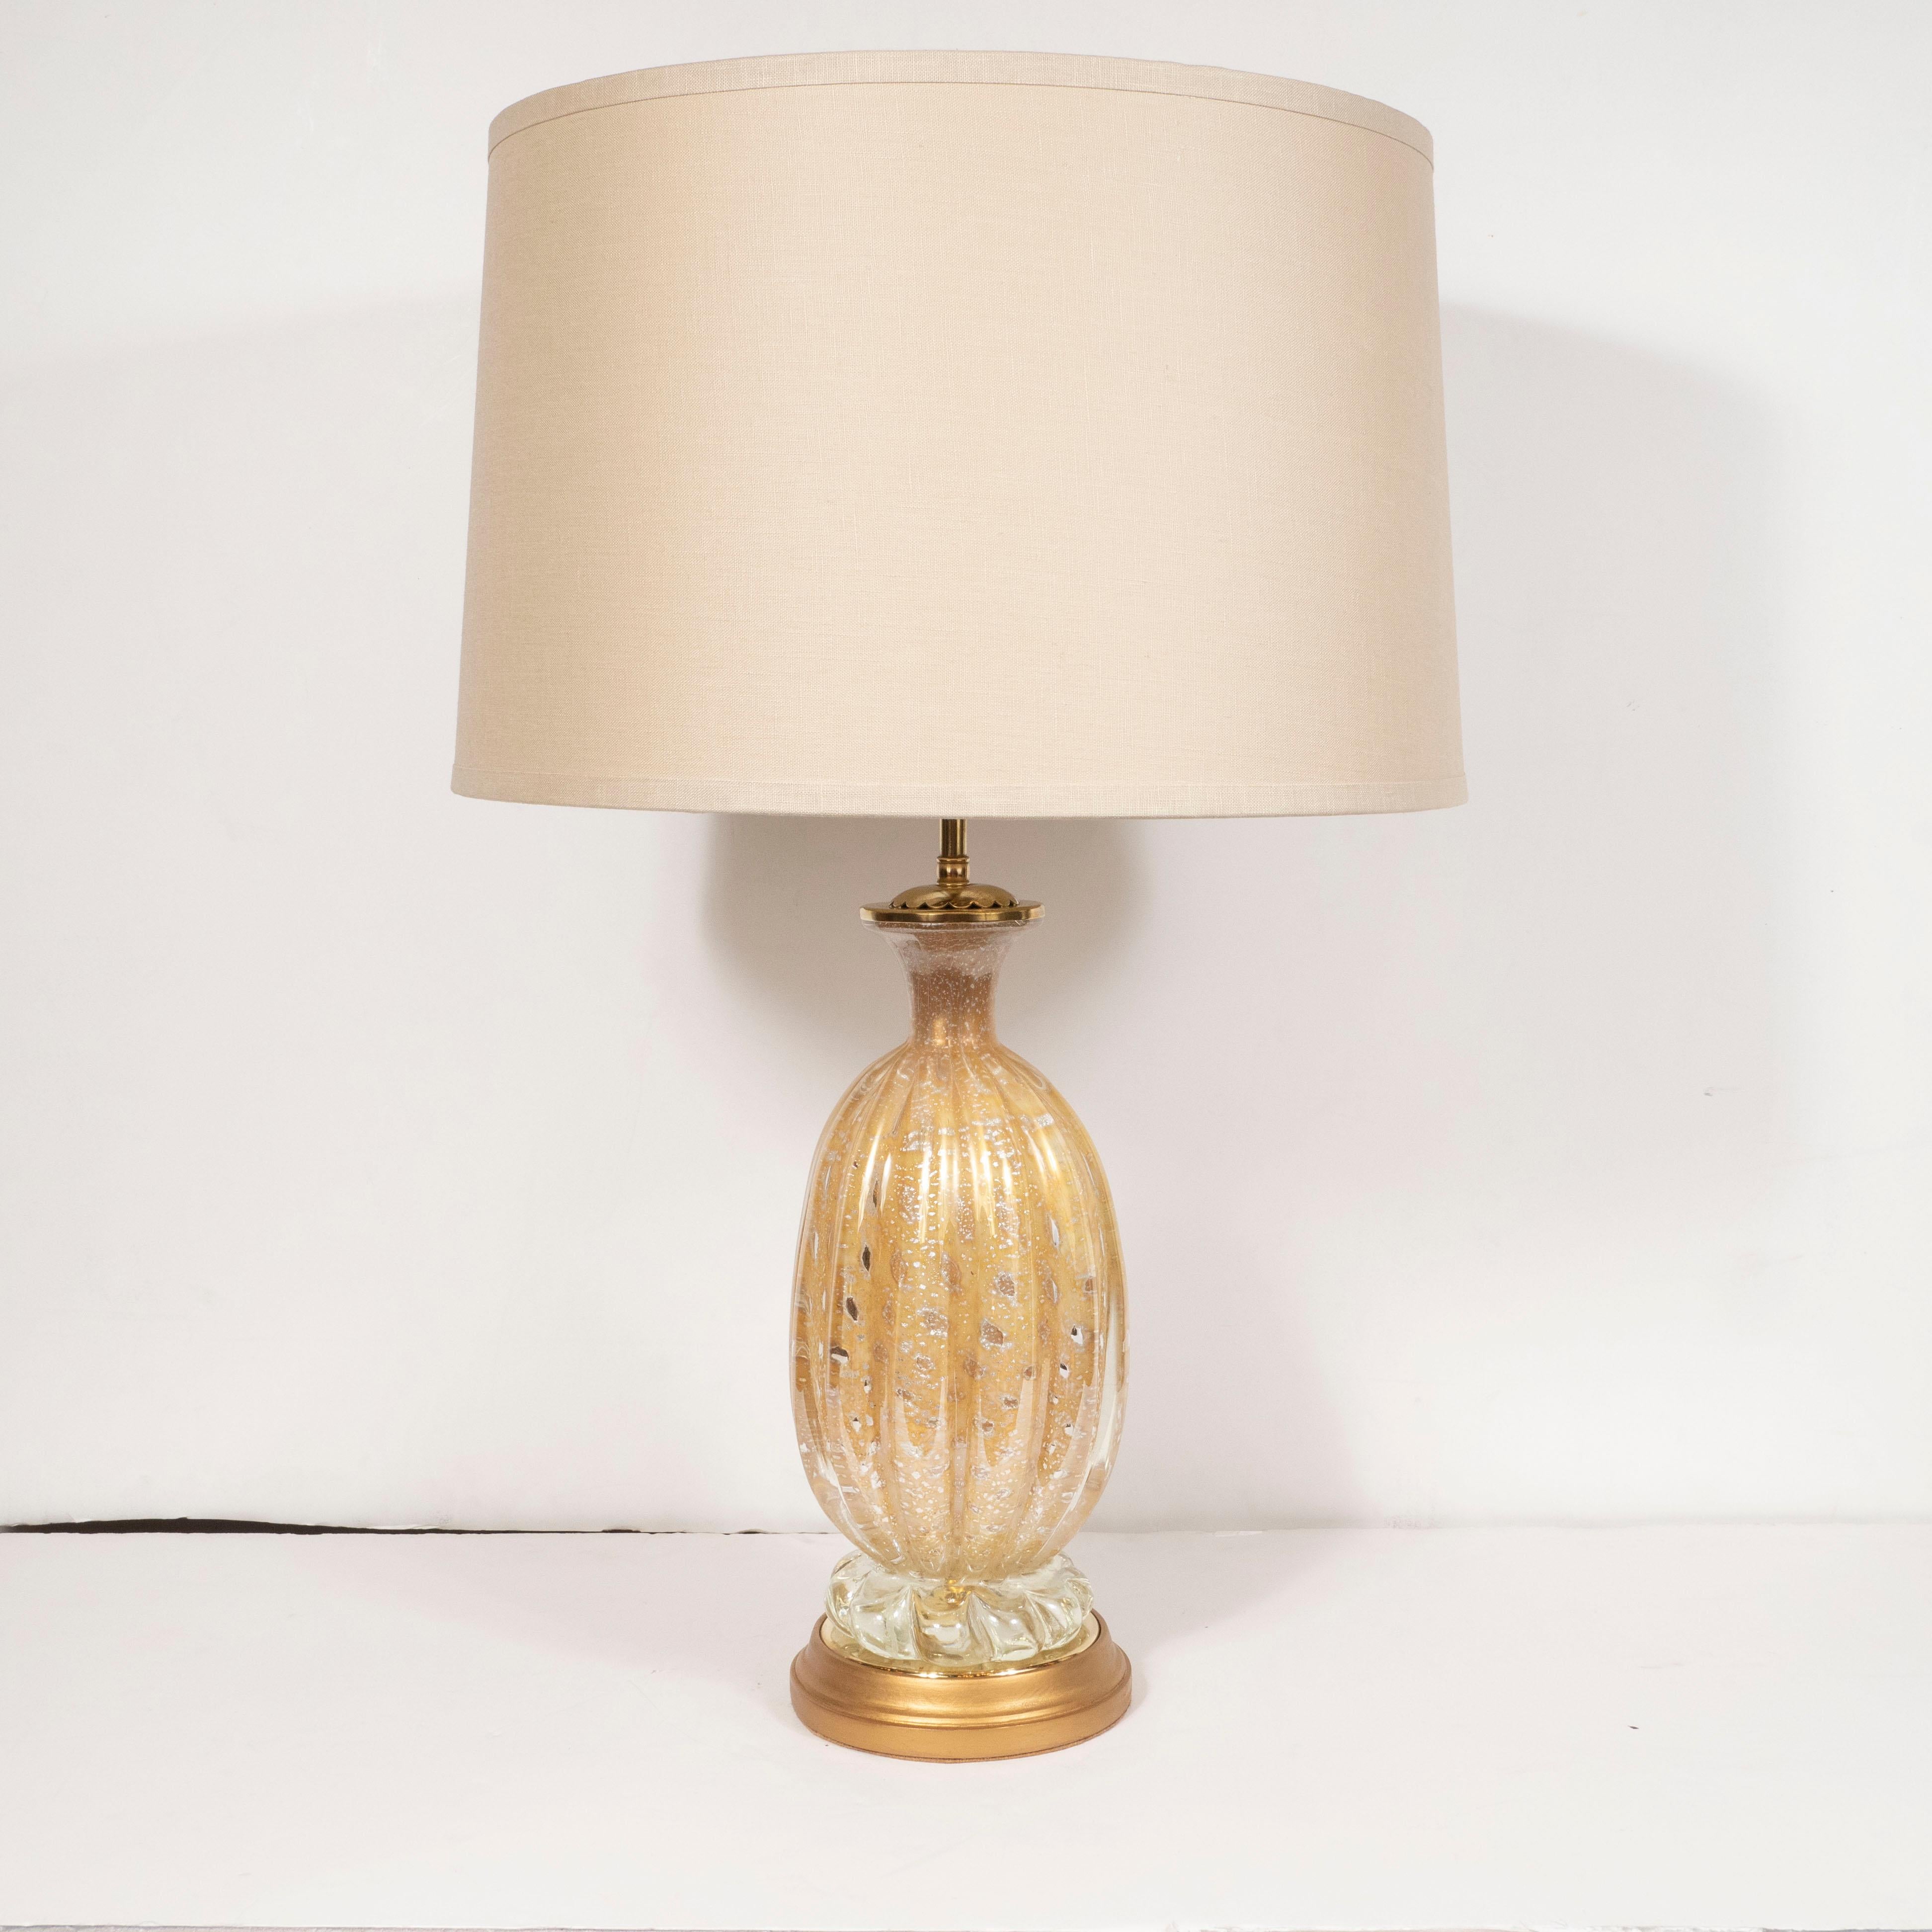 This stunning pair of Mid-Century Modern table lamps were realized by the fabled Italian atelier of Barovier e Toso in Italy, circa 1950. Realized in beautiful Murano glass infused with 24-karat yellow and white gold flecks as well murines